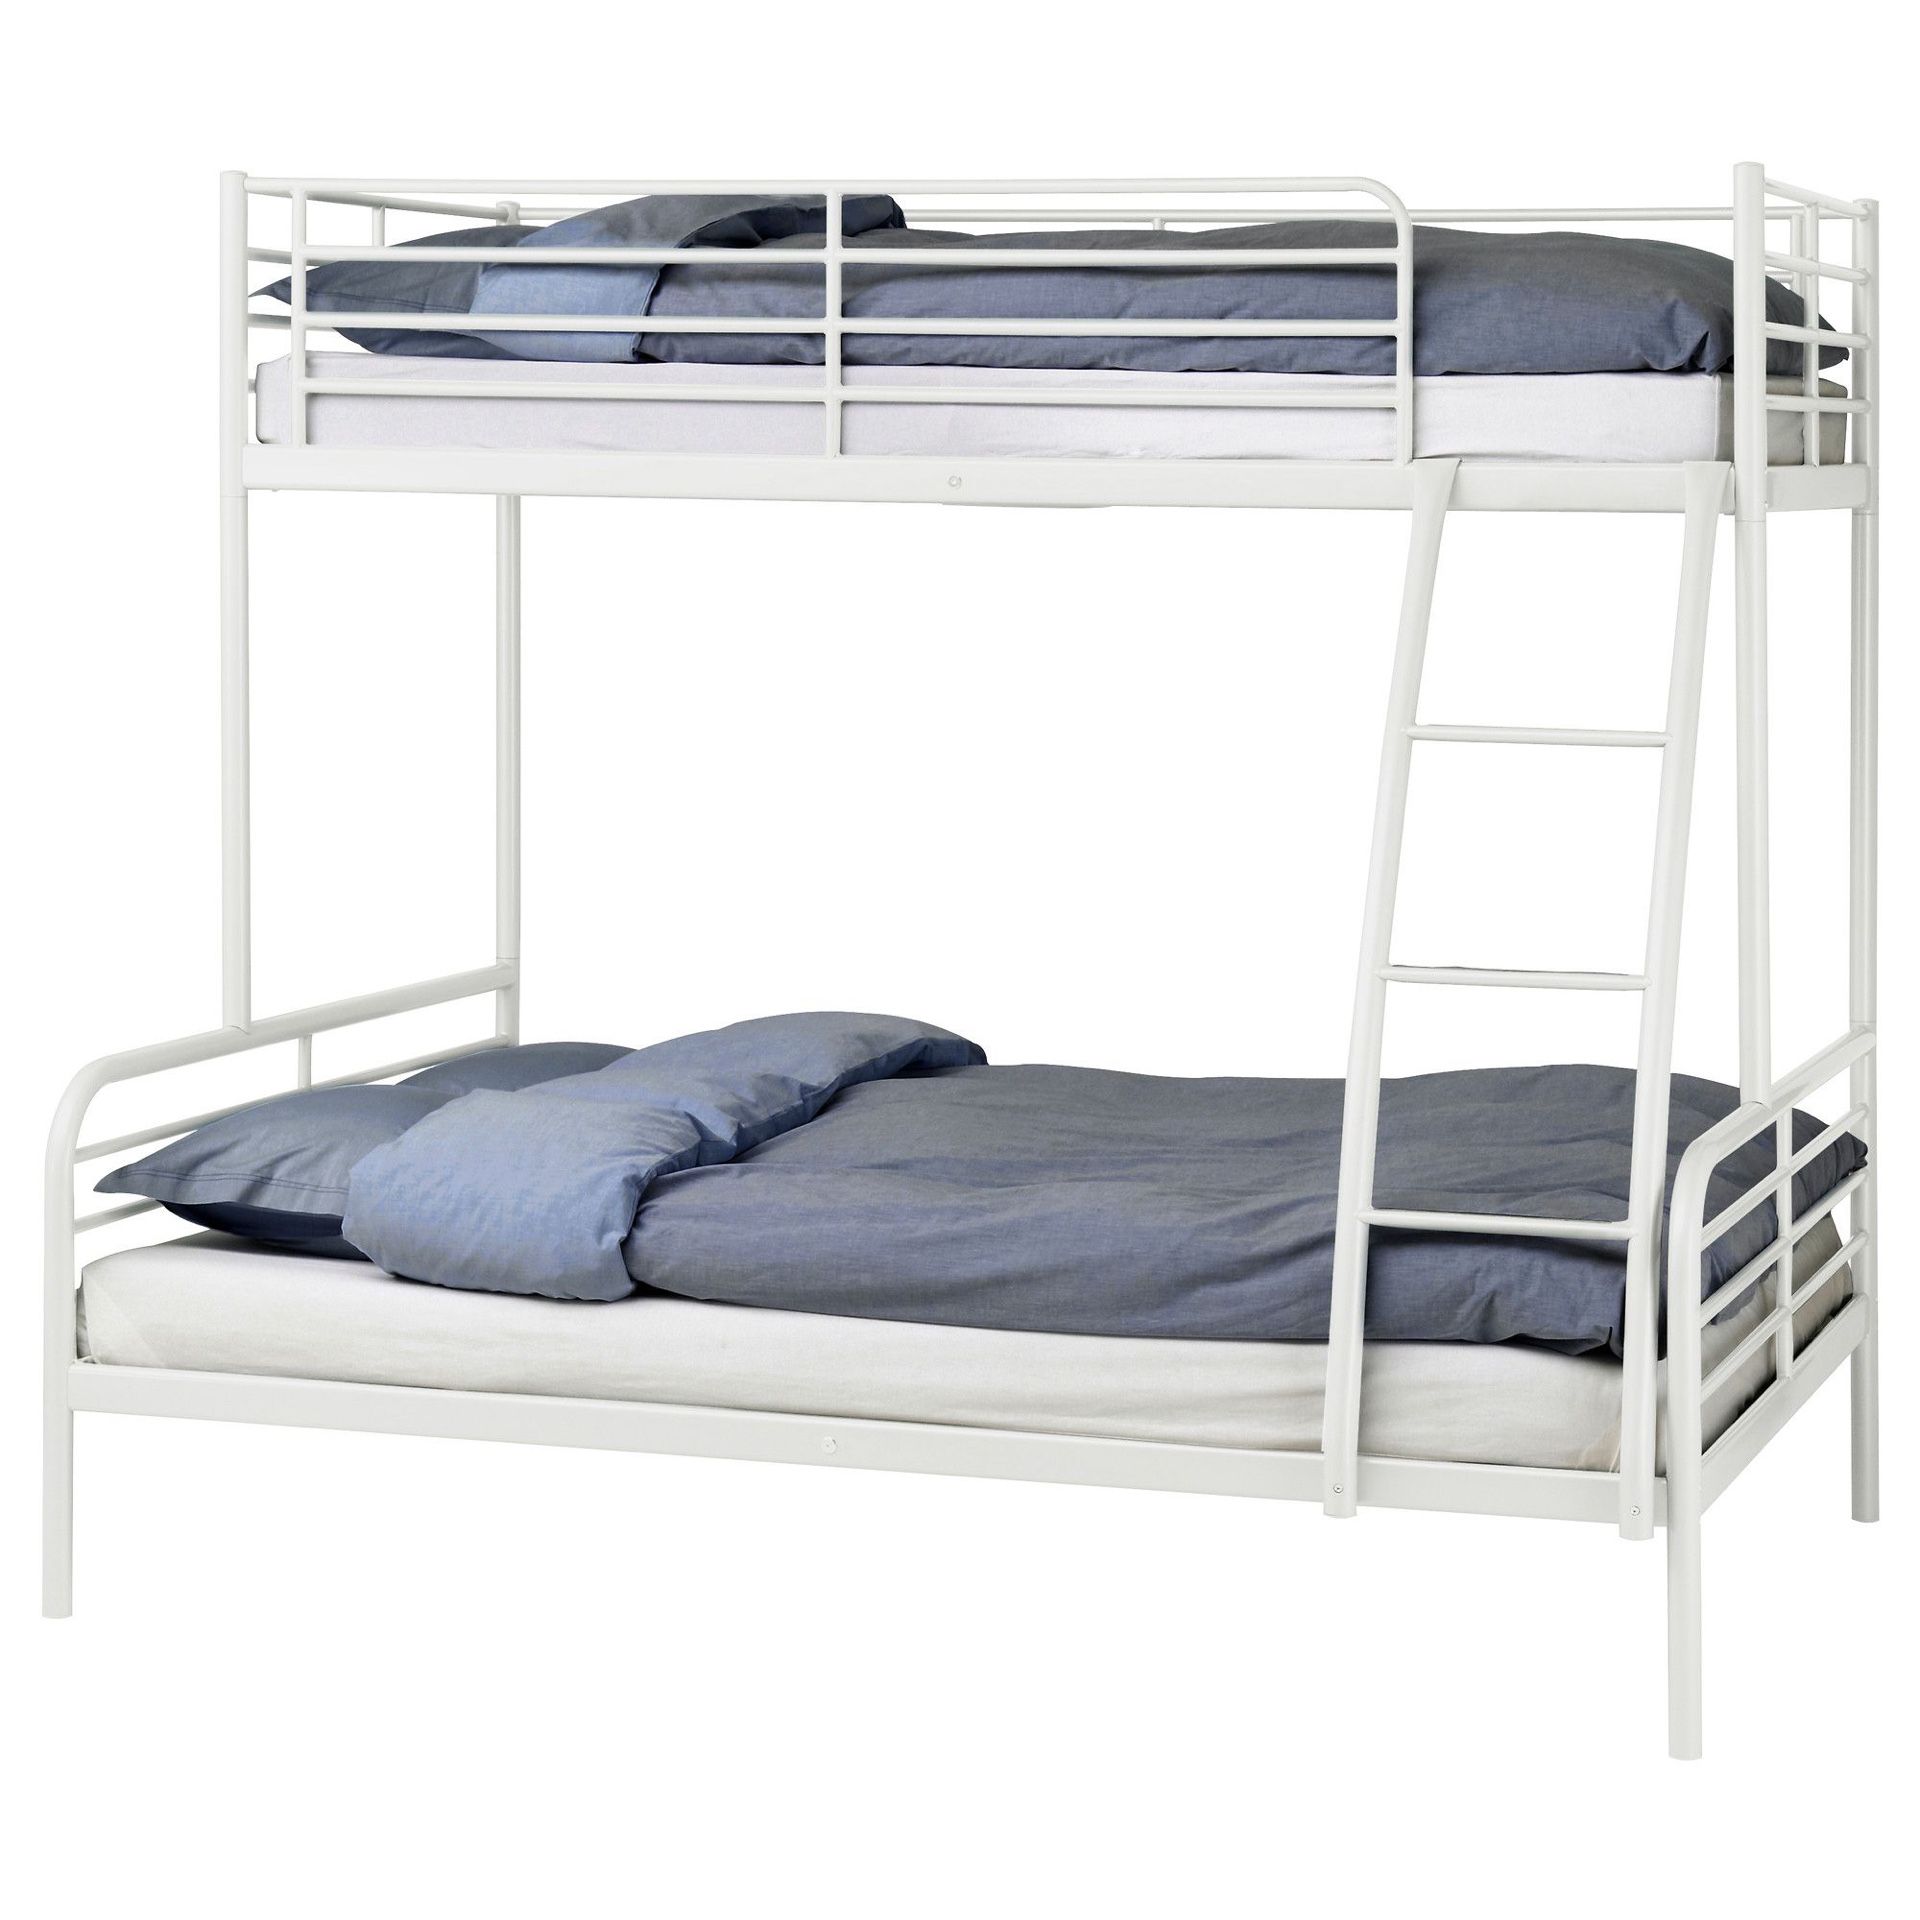 IKEA twin over full bunk bed